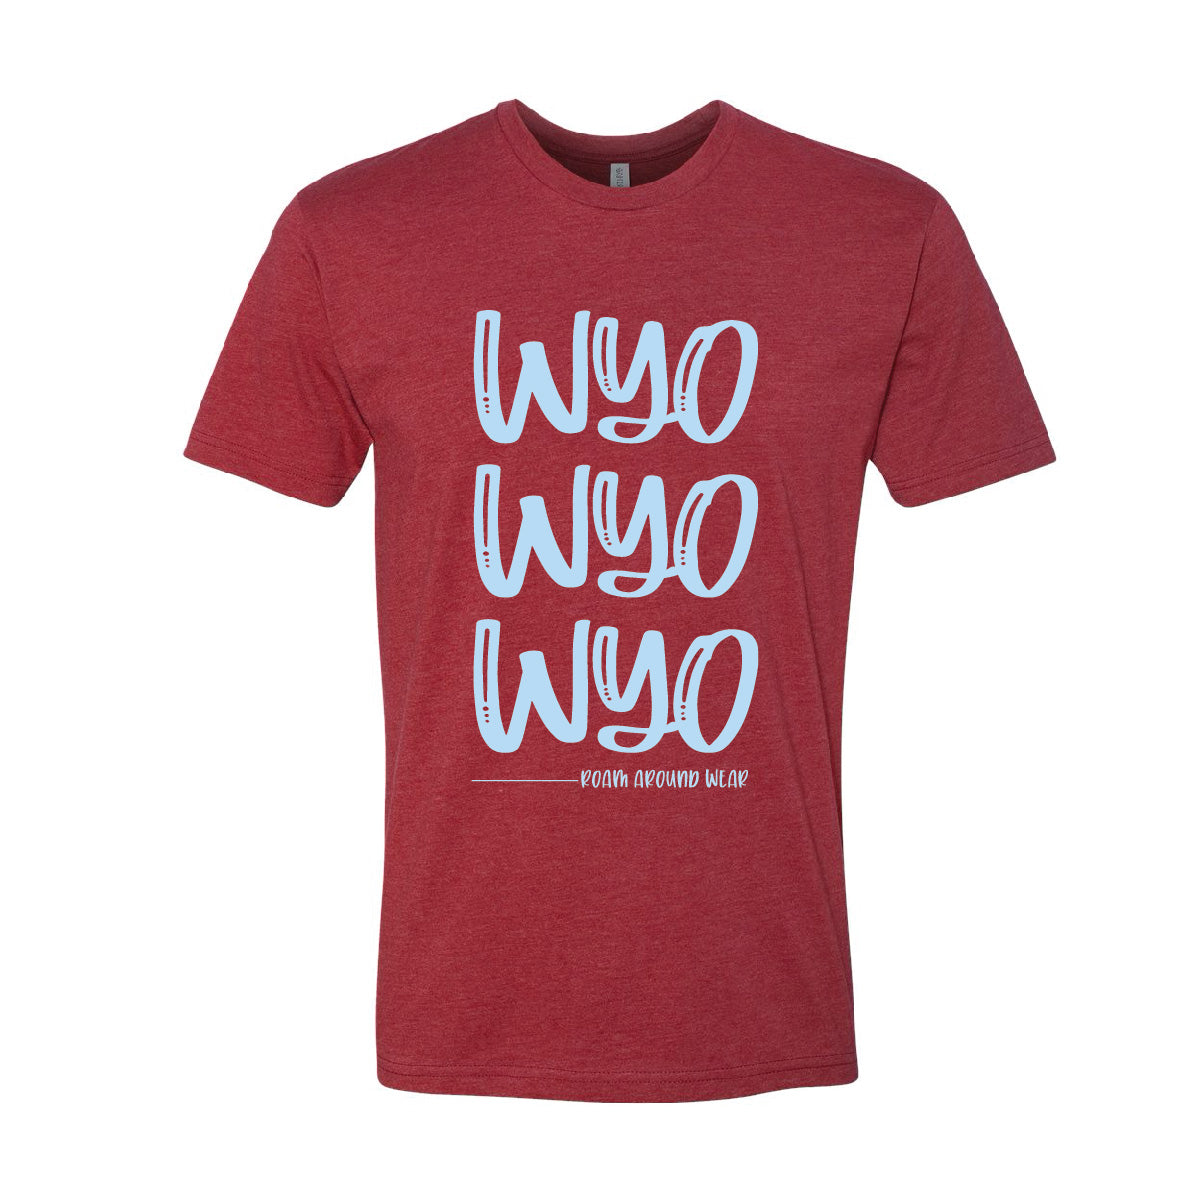 Roam Around Wear is a Wyoming t-shirt company based out of Gillette, Wyoming. Wyoming red and blue tee. Unisex tee. Wyoming t-shirt. Roam Around Wear is a Wyoming t-shirt company based in Gillette, Wyoming